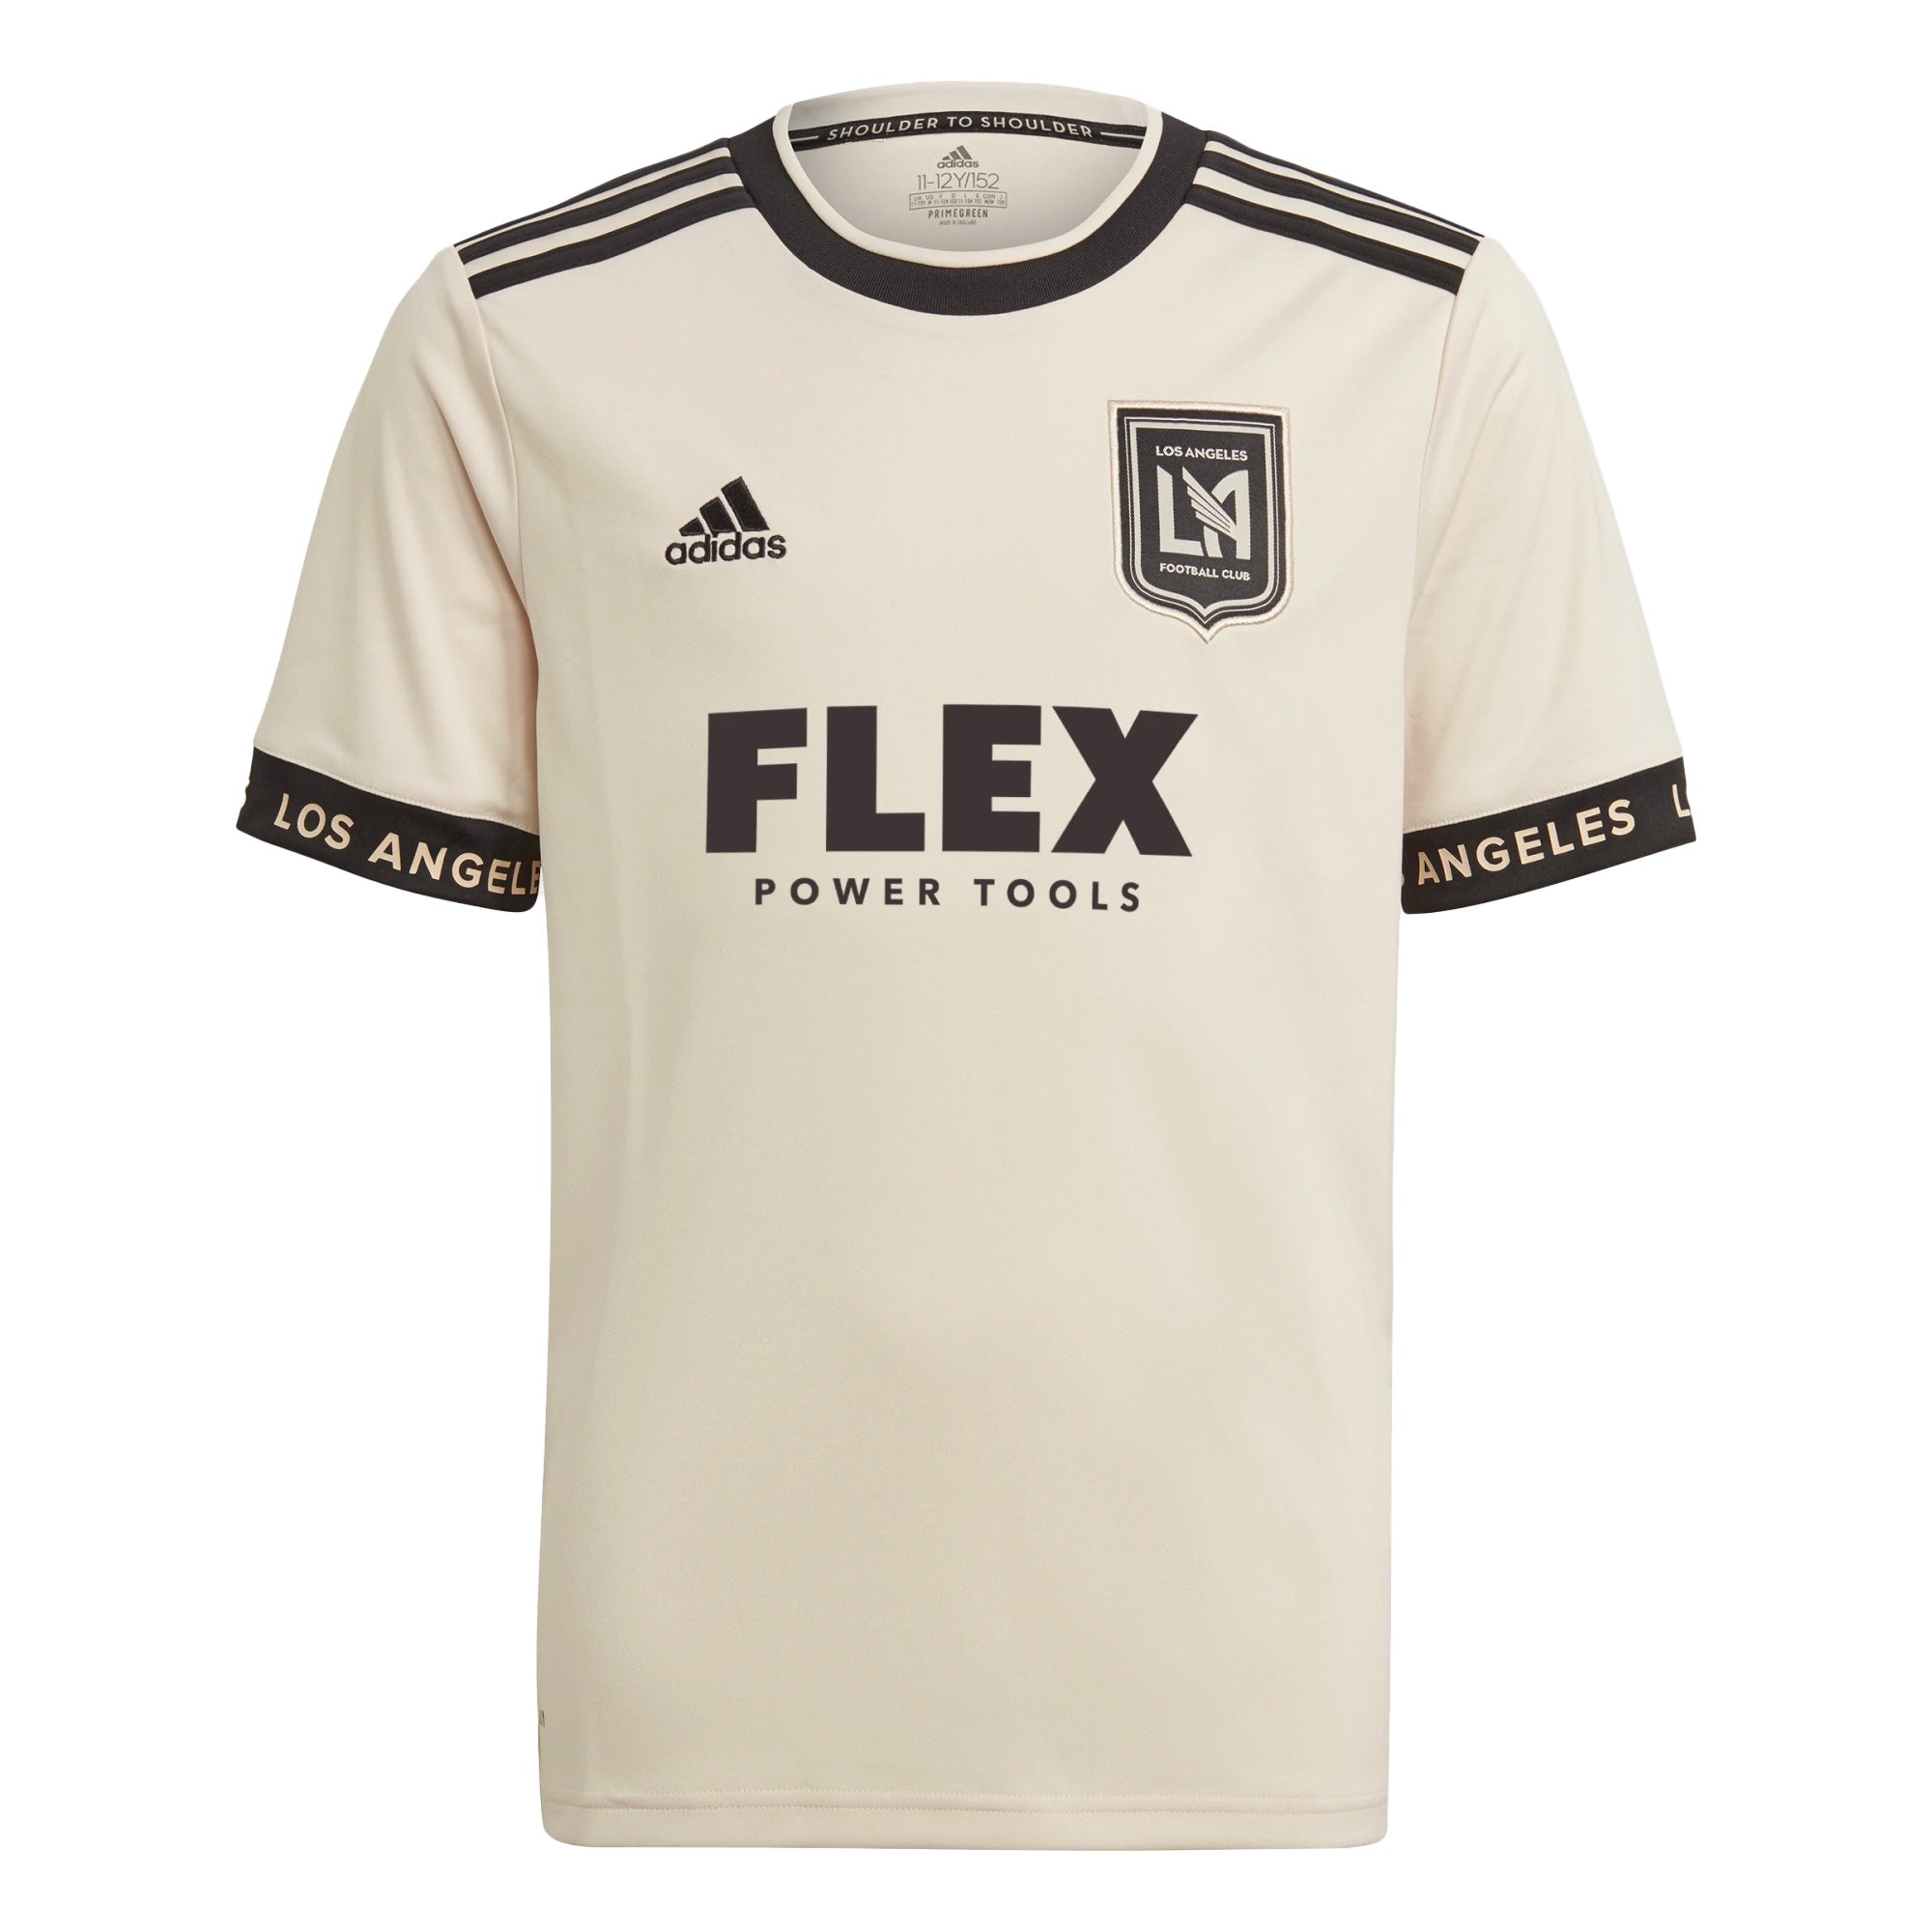 adidas LAFC Men's Home Jersey Black, Gold